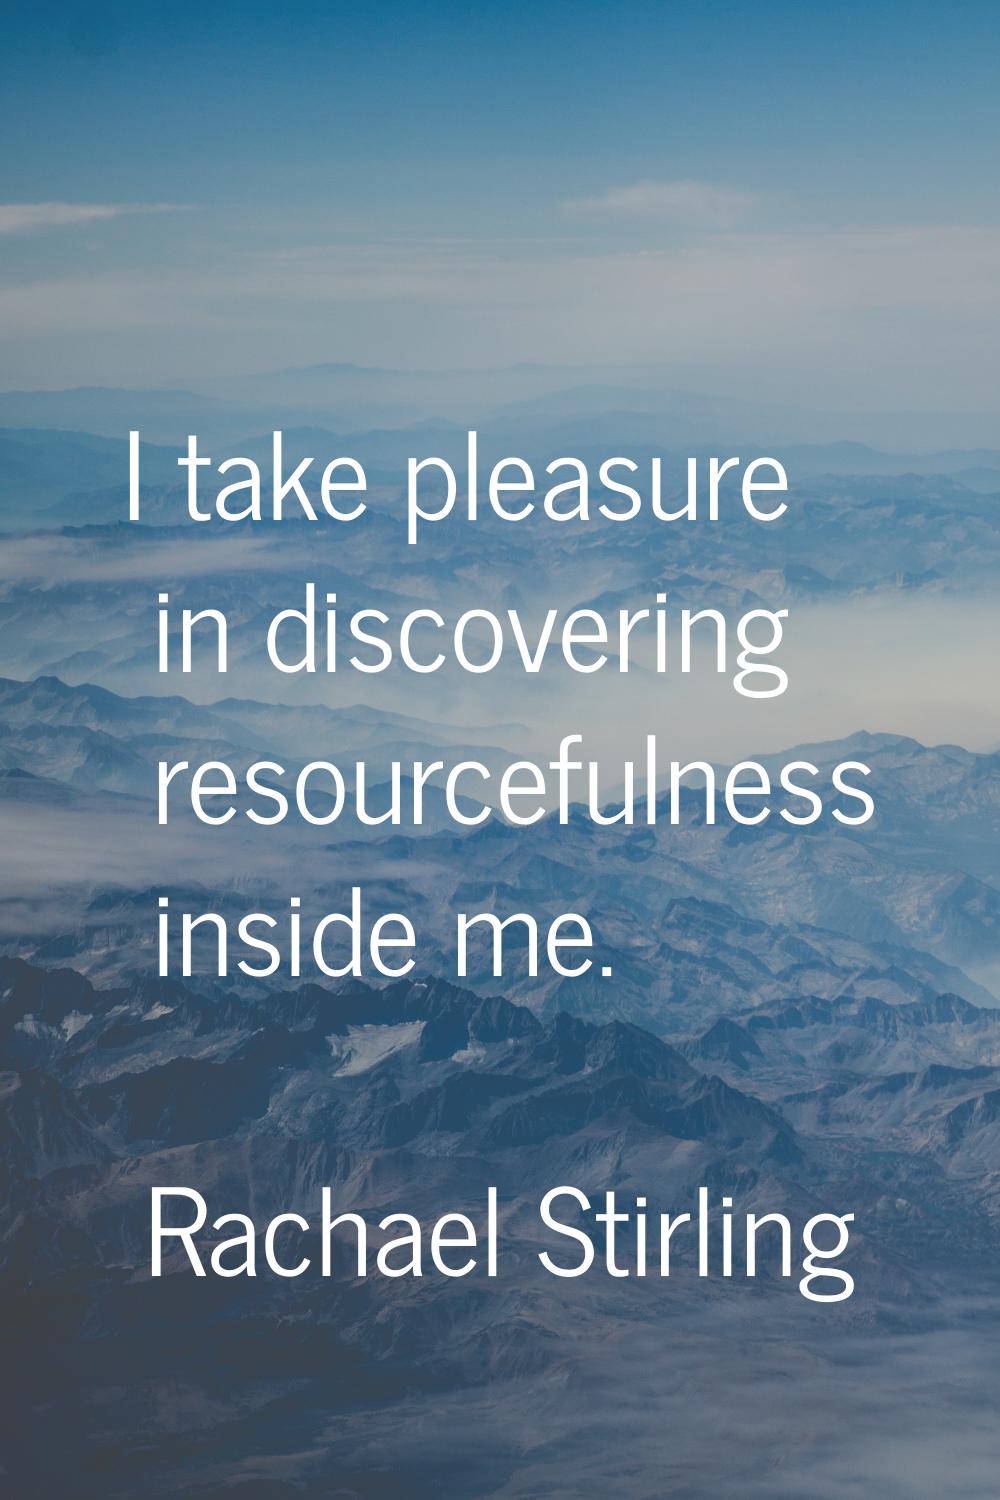 I take pleasure in discovering resourcefulness inside me.